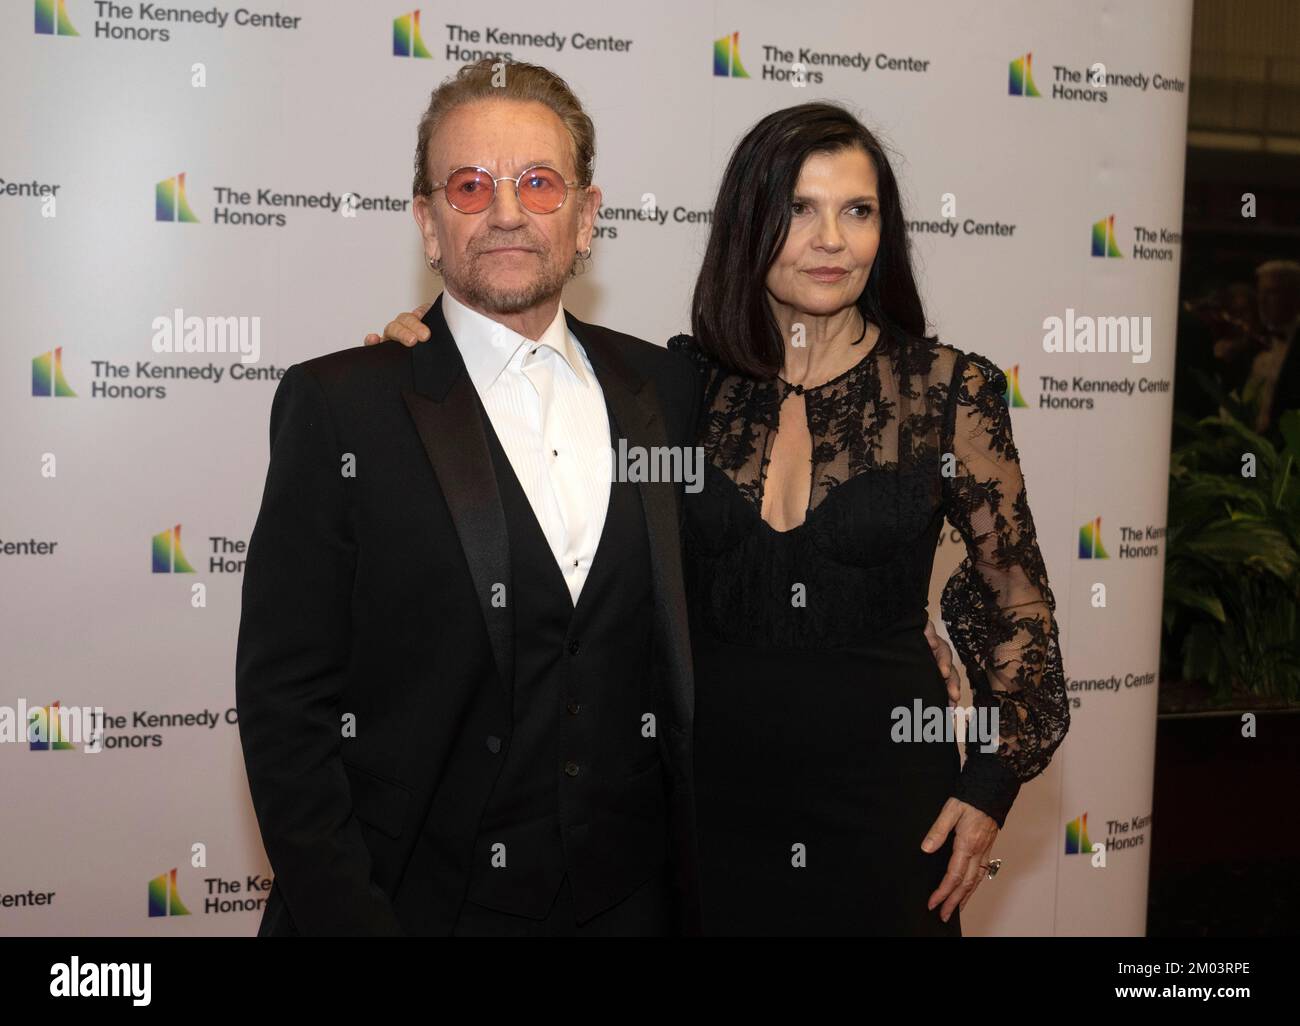 Mysterious Distance: Bono and Ali Hewson to Appear in LVMH Campaign